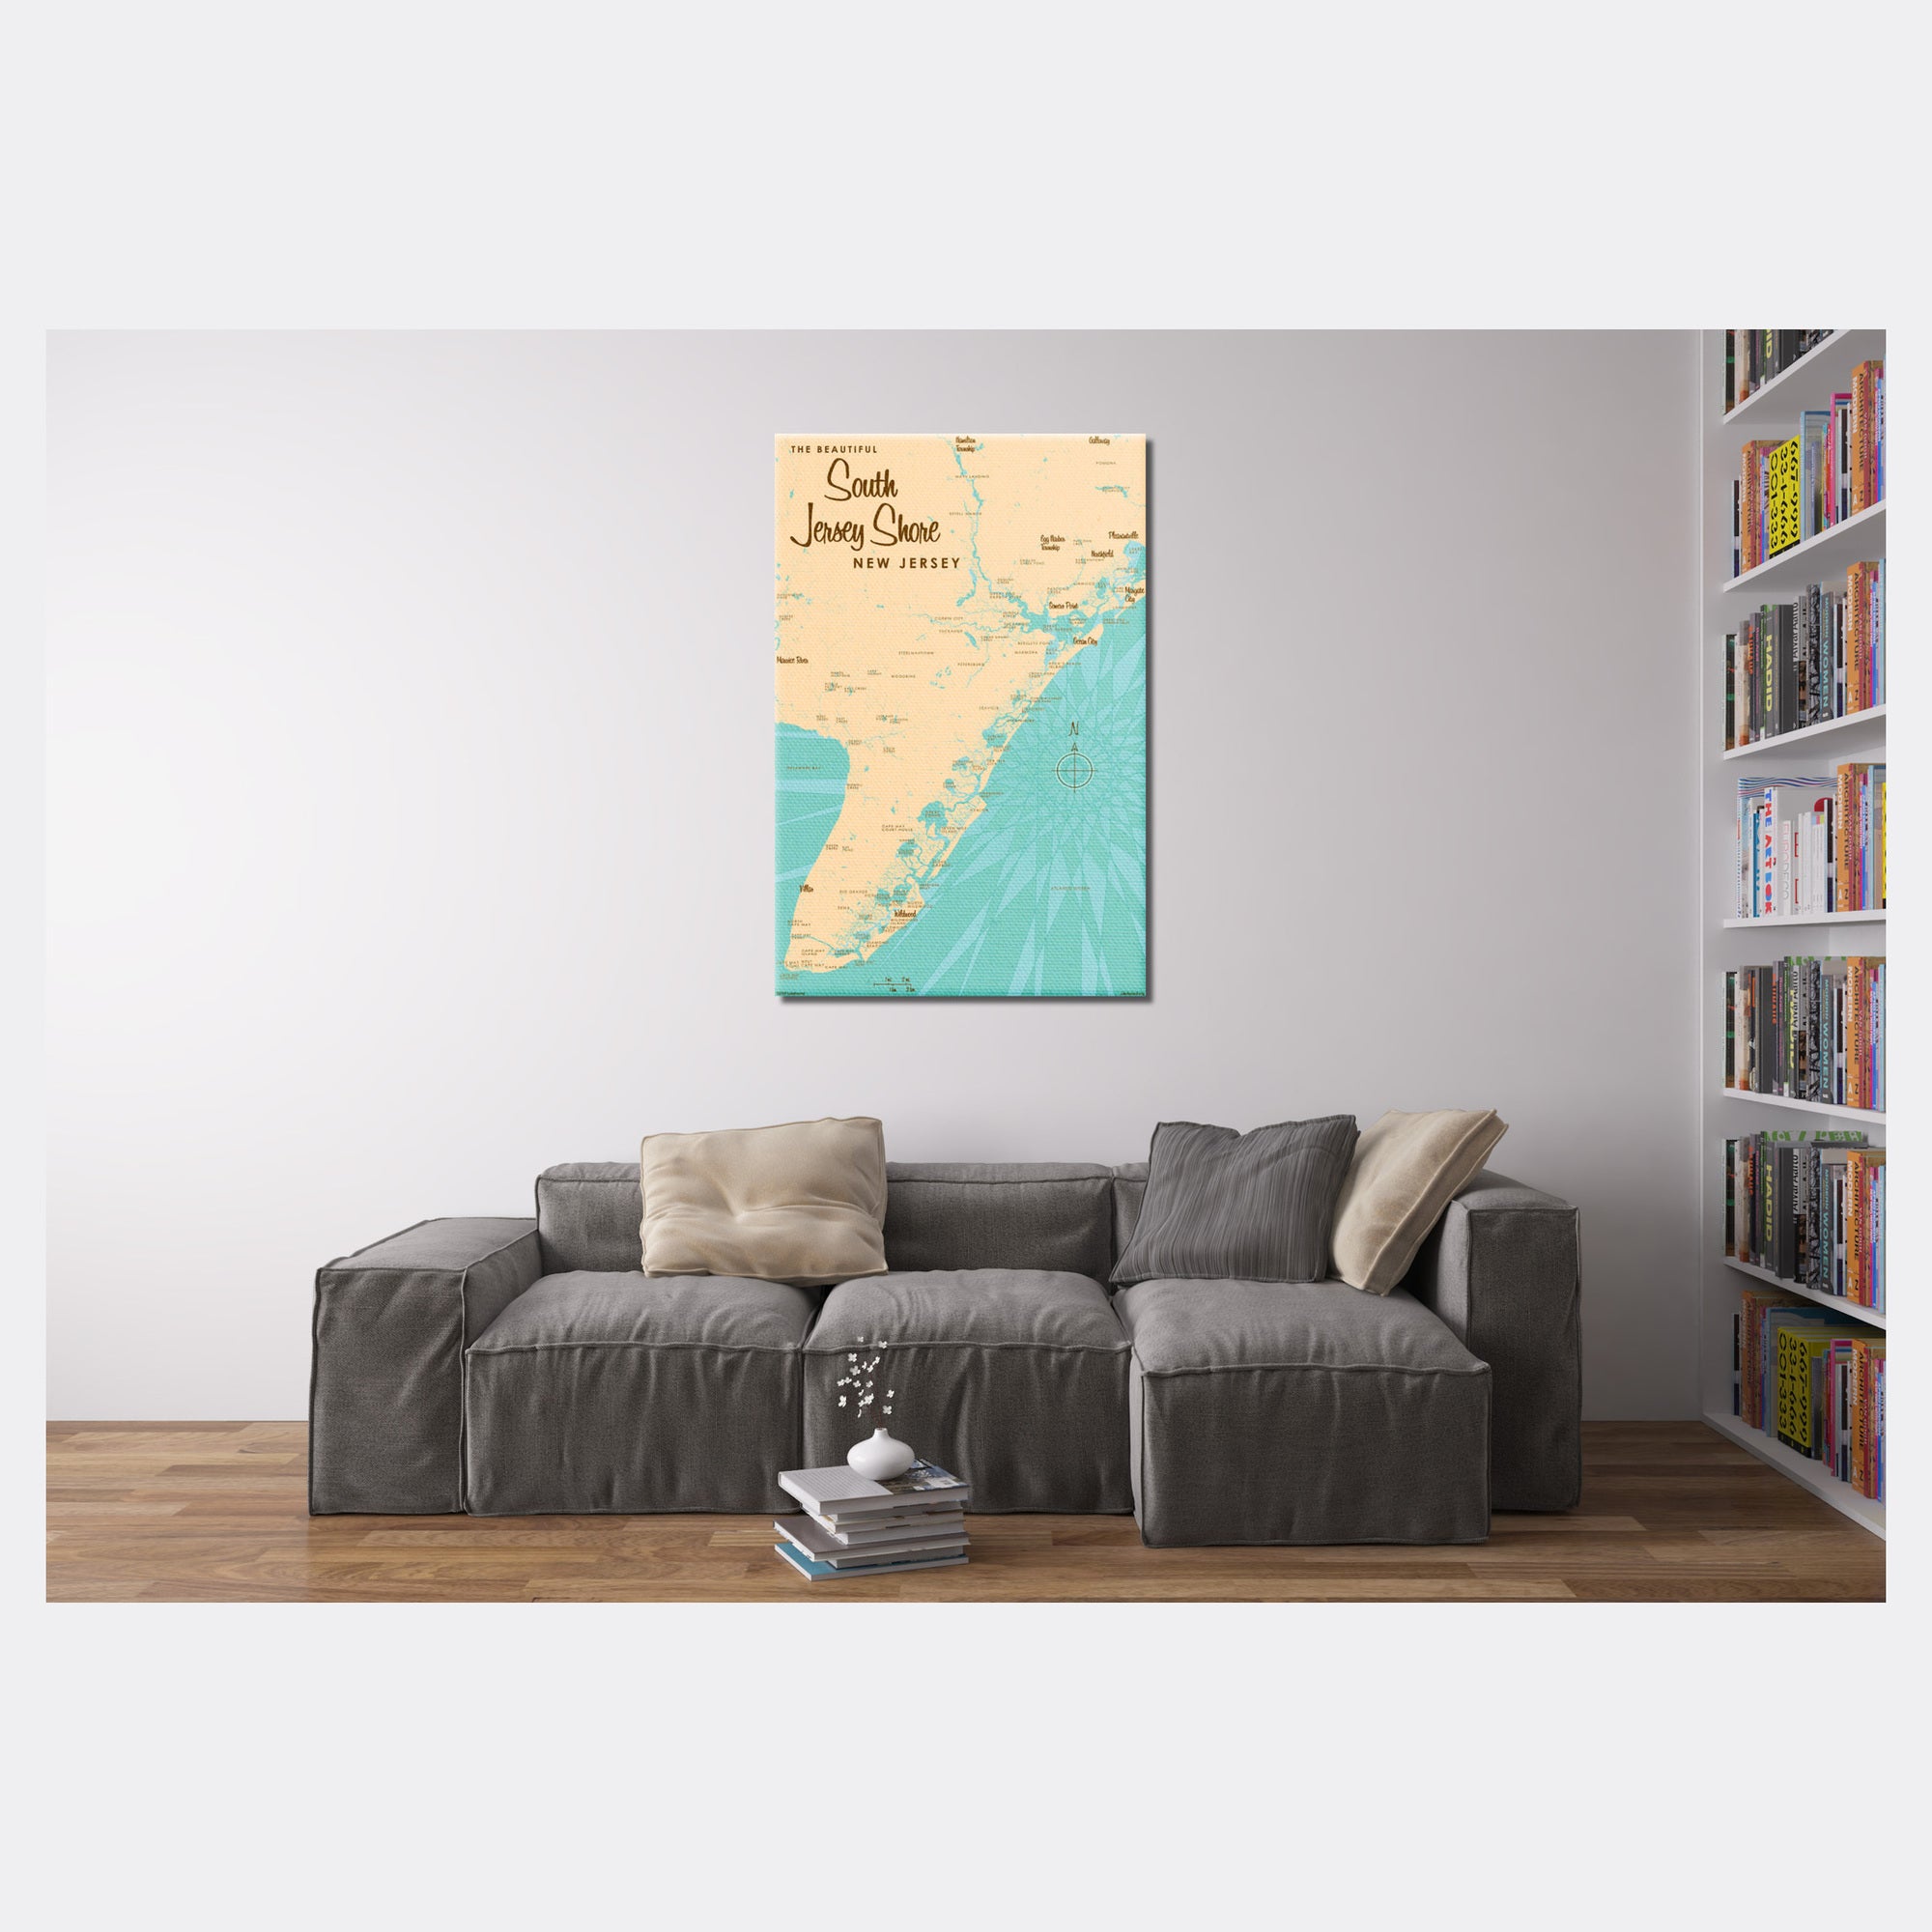 South Jersey Shore New Jersey, Canvas Print